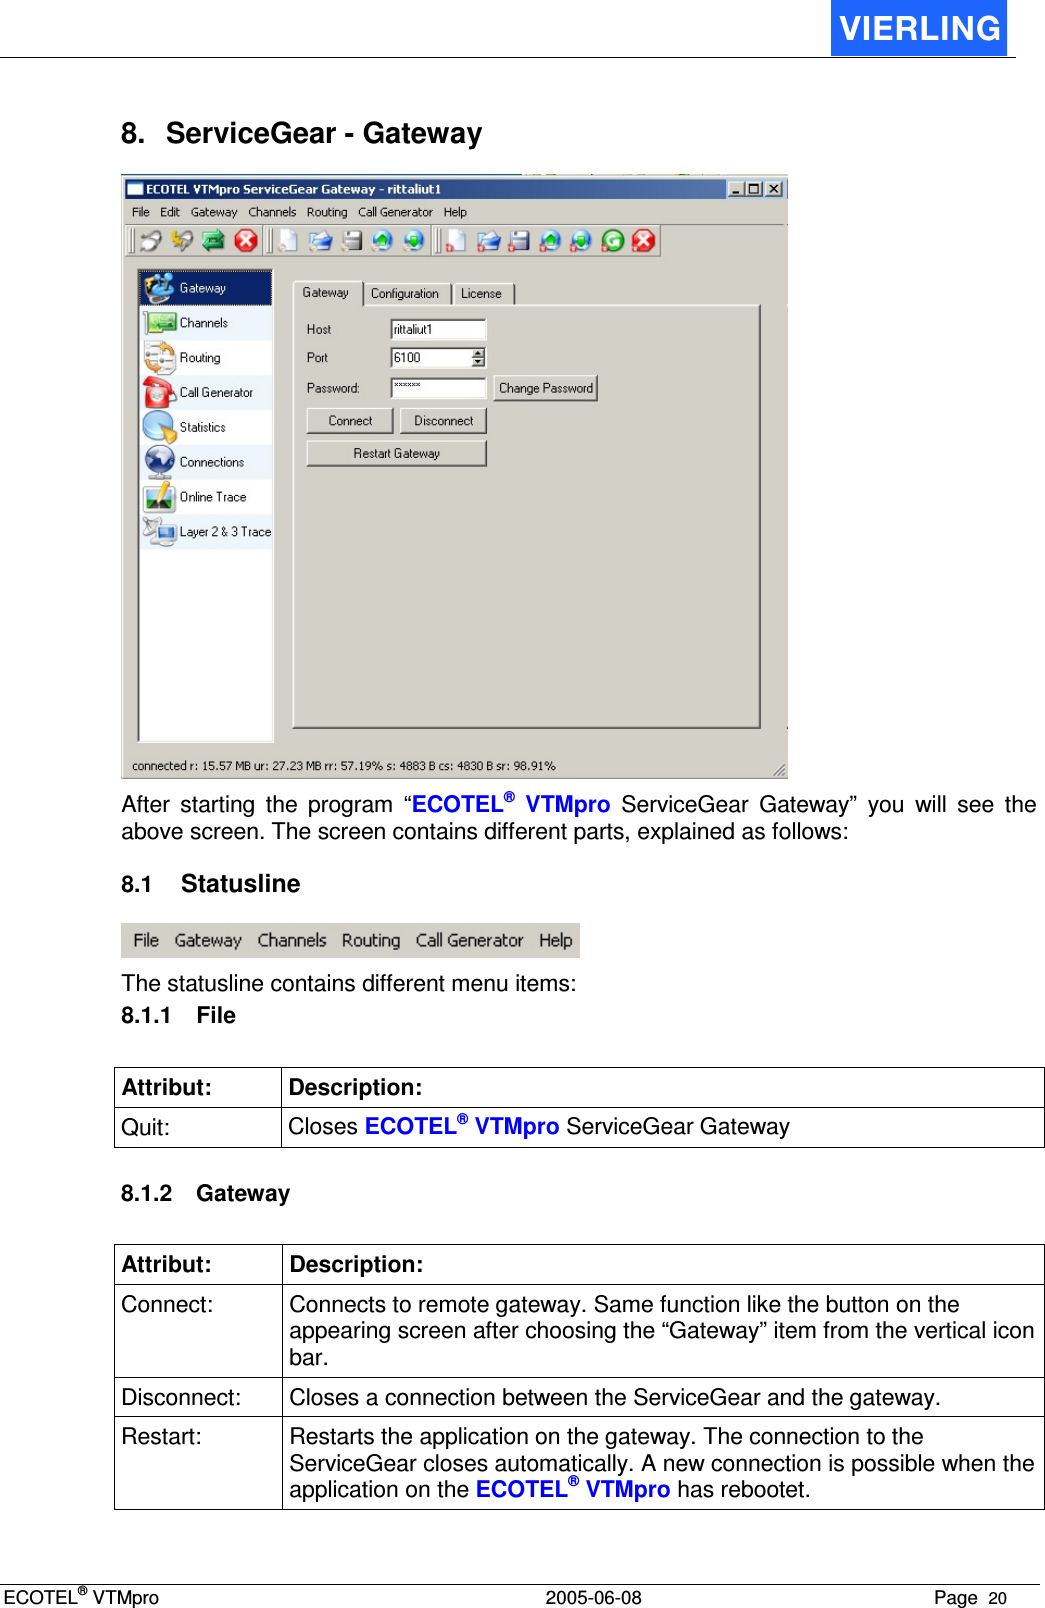 ECOTEL® VTMpro  2005-06-08 Page  20    8.  ServiceGear - Gateway  After  starting  the  program  “ECOTEL®  VTMpro  ServiceGear  Gateway”  you  will  see  the above screen. The screen contains different parts, explained as follows: 8.1 Statusline  The statusline contains different menu items: 8.1.1  File Attribut:  Description: Quit:  Closes ECOTEL® VTMpro ServiceGear Gateway  8.1.2  Gateway Attribut:  Description: Connect:  Connects to remote gateway. Same function like the button on the appearing screen after choosing the “Gateway” item from the vertical icon bar. Disconnect:  Closes a connection between the ServiceGear and the gateway. Restart:  Restarts the application on the gateway. The connection to the ServiceGear closes automatically. A new connection is possible when the application on the ECOTEL® VTMpro has rebootet.  